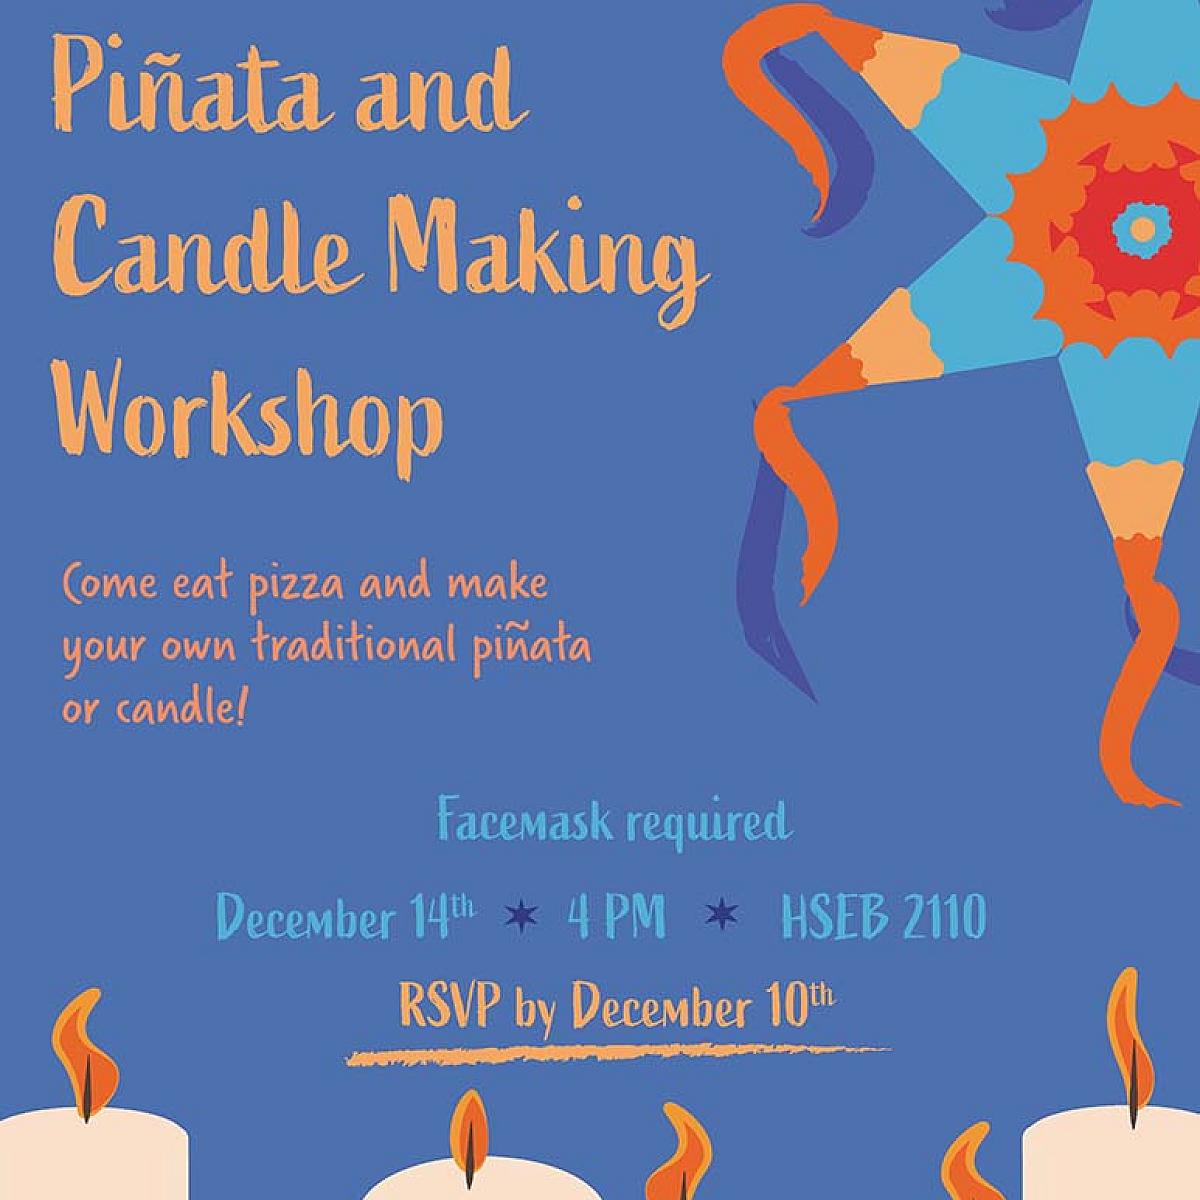 Piñata and Candle Making Workshop Flyer